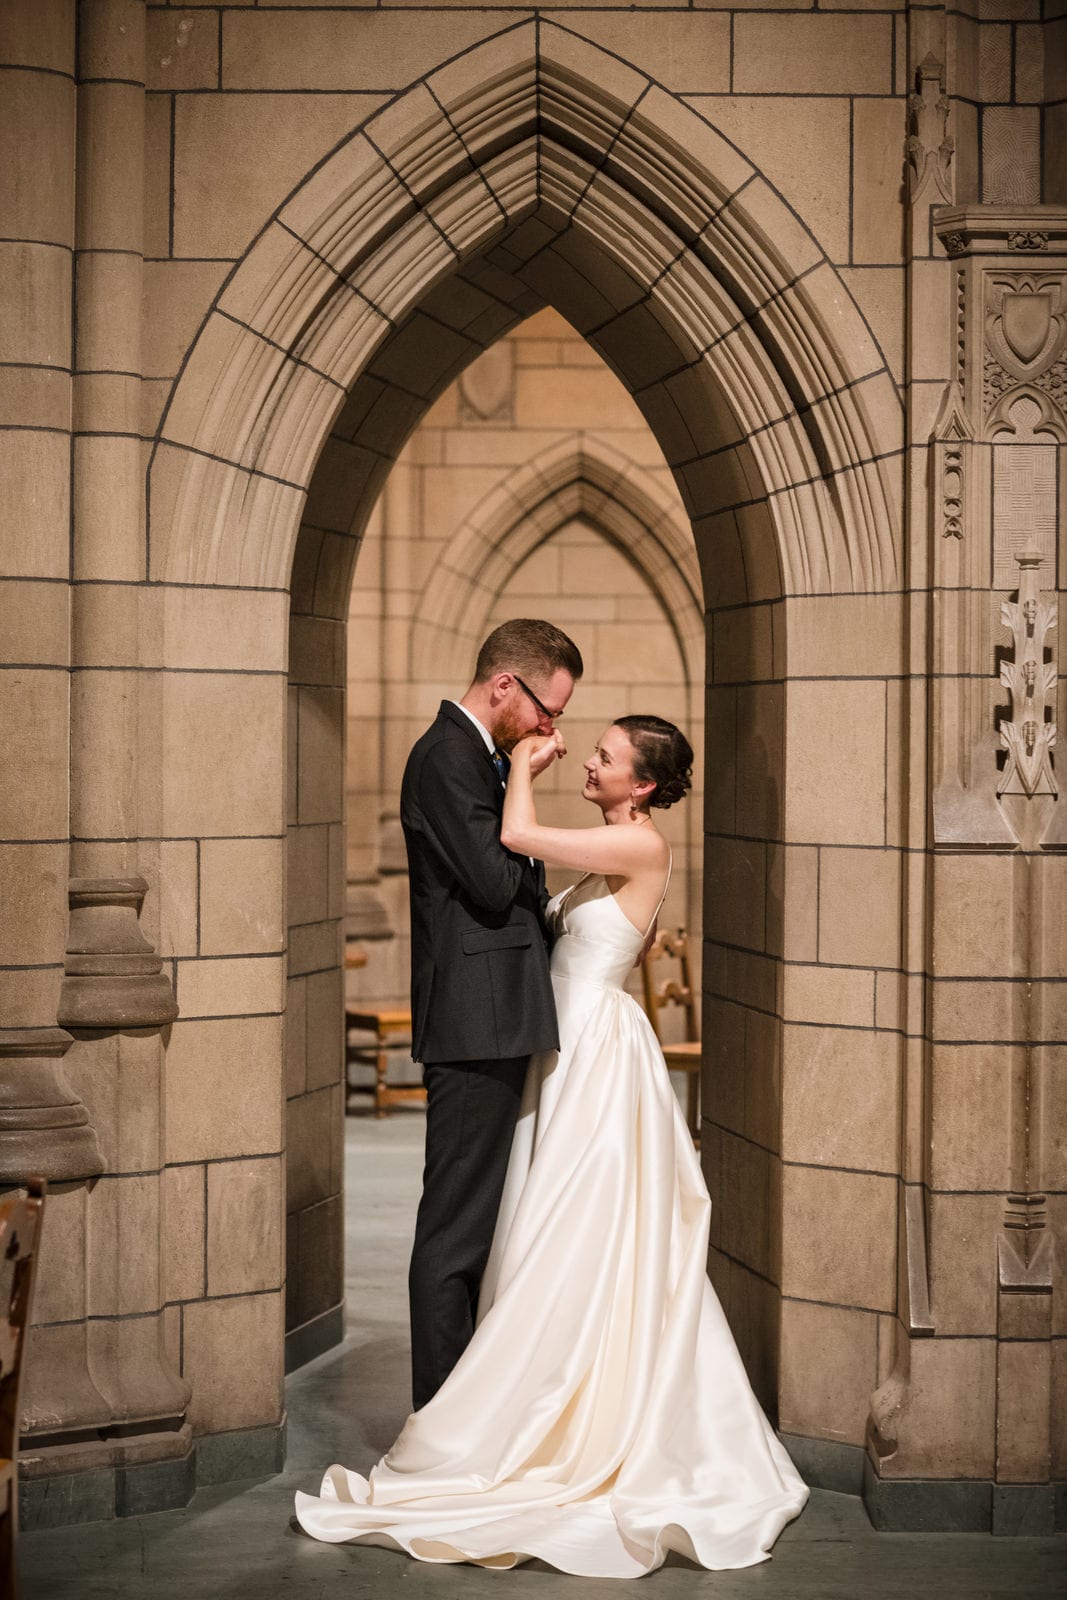 A bride and groom stand in an archway inside of the Cathedral of Learning at the University of Pittsburgh. The groom holds the bride's hand up and kisses it.